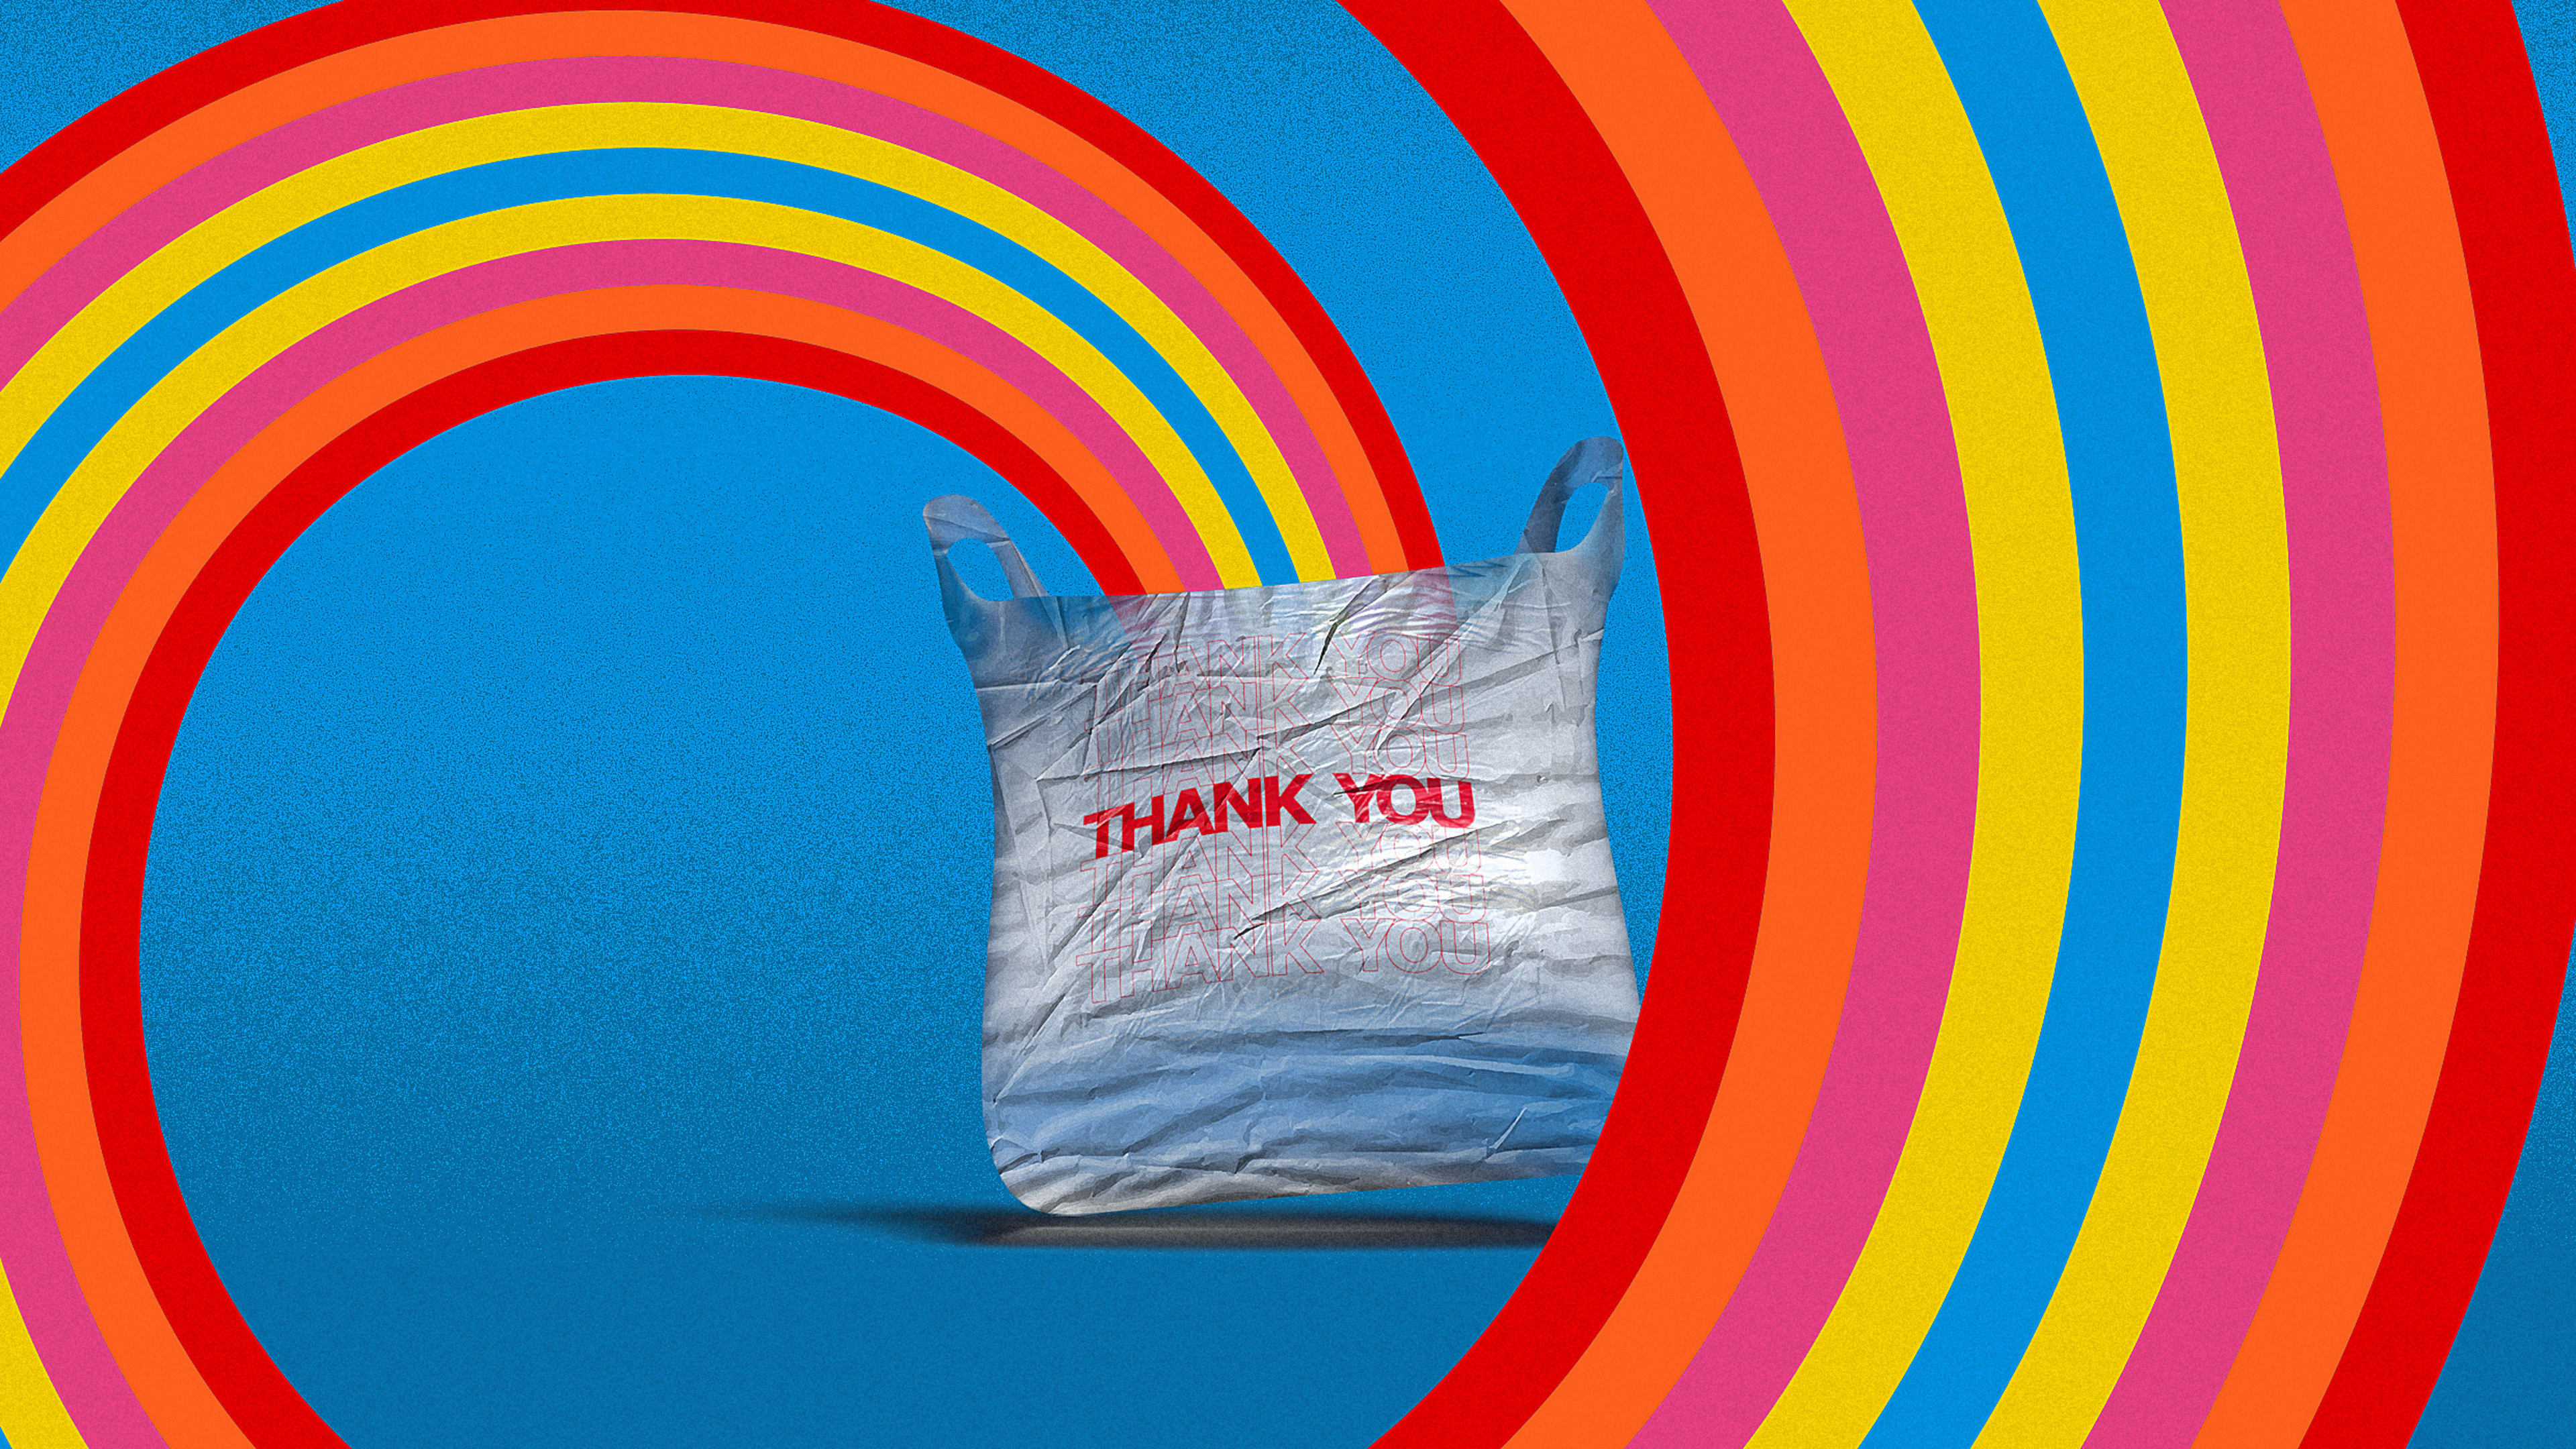 Walmart, Target, and CVS team up to reinvent single-use plastic bags